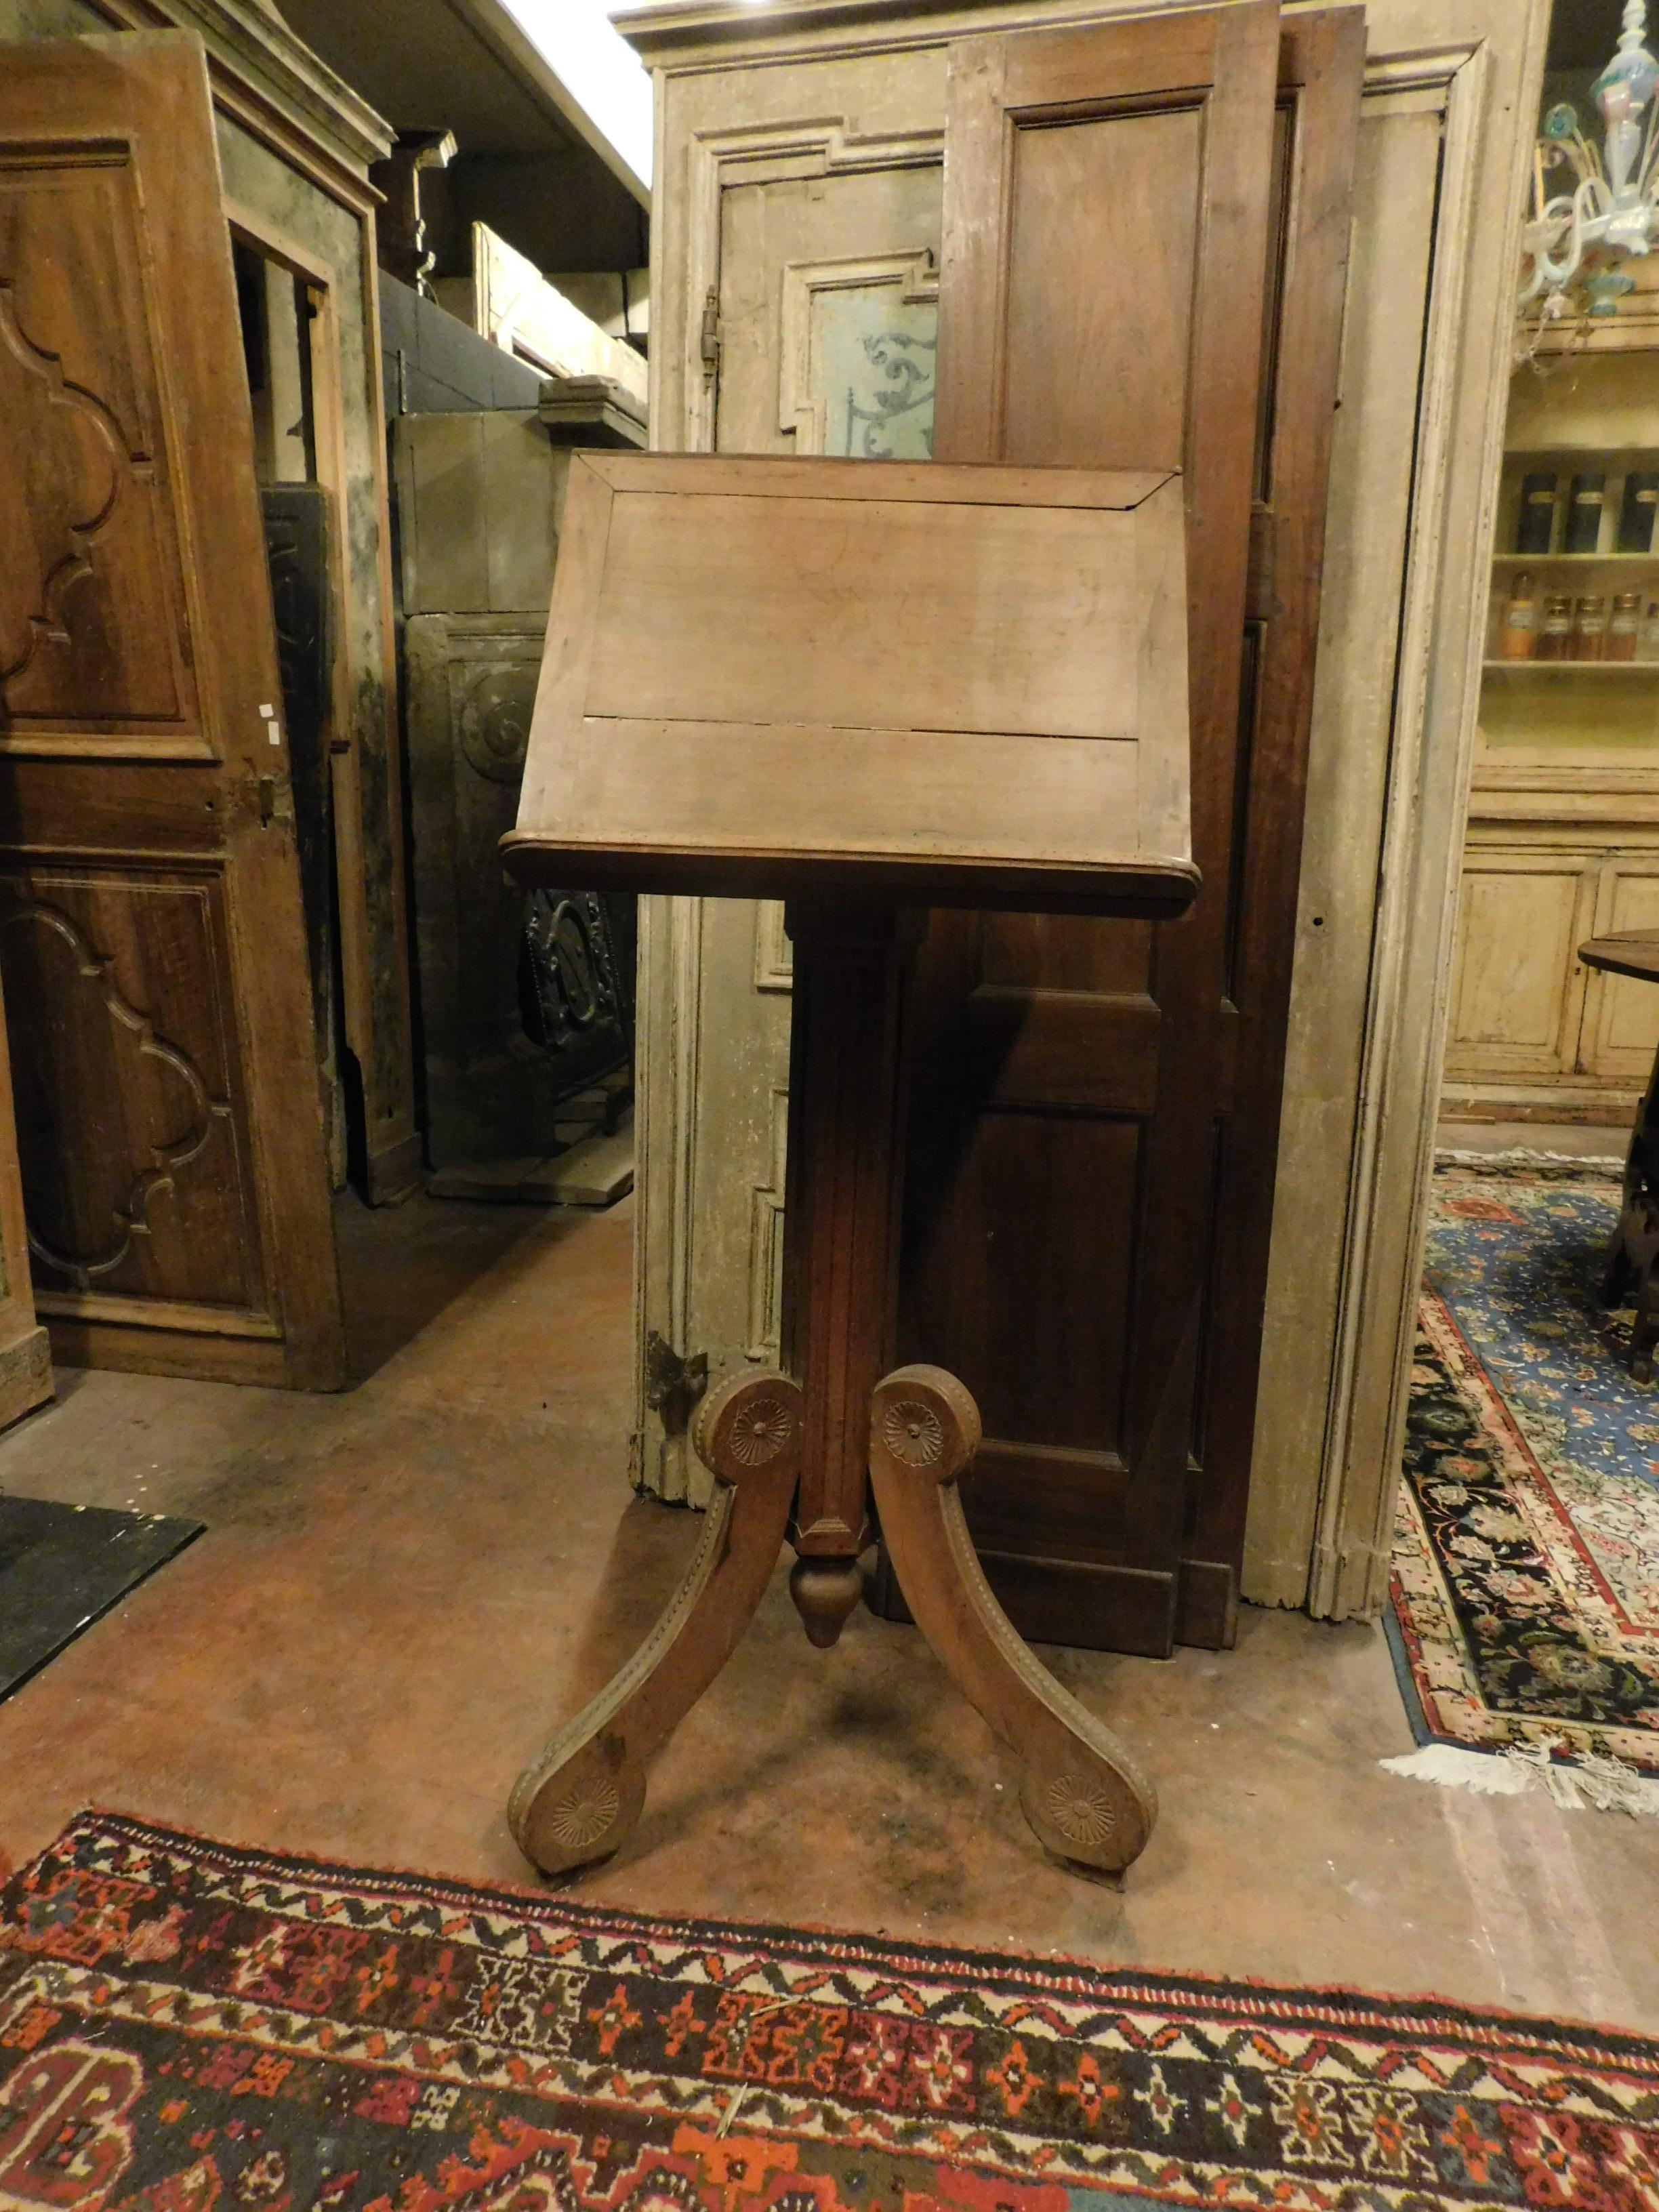 Antique walnut lectern, 19th century Rome (Italy), built with exhibition bell and internal container, 3 hand-turned support legs, from Rome, ideal as a display for books, sheet music, photos and registers, suitable for offices, shops or charming